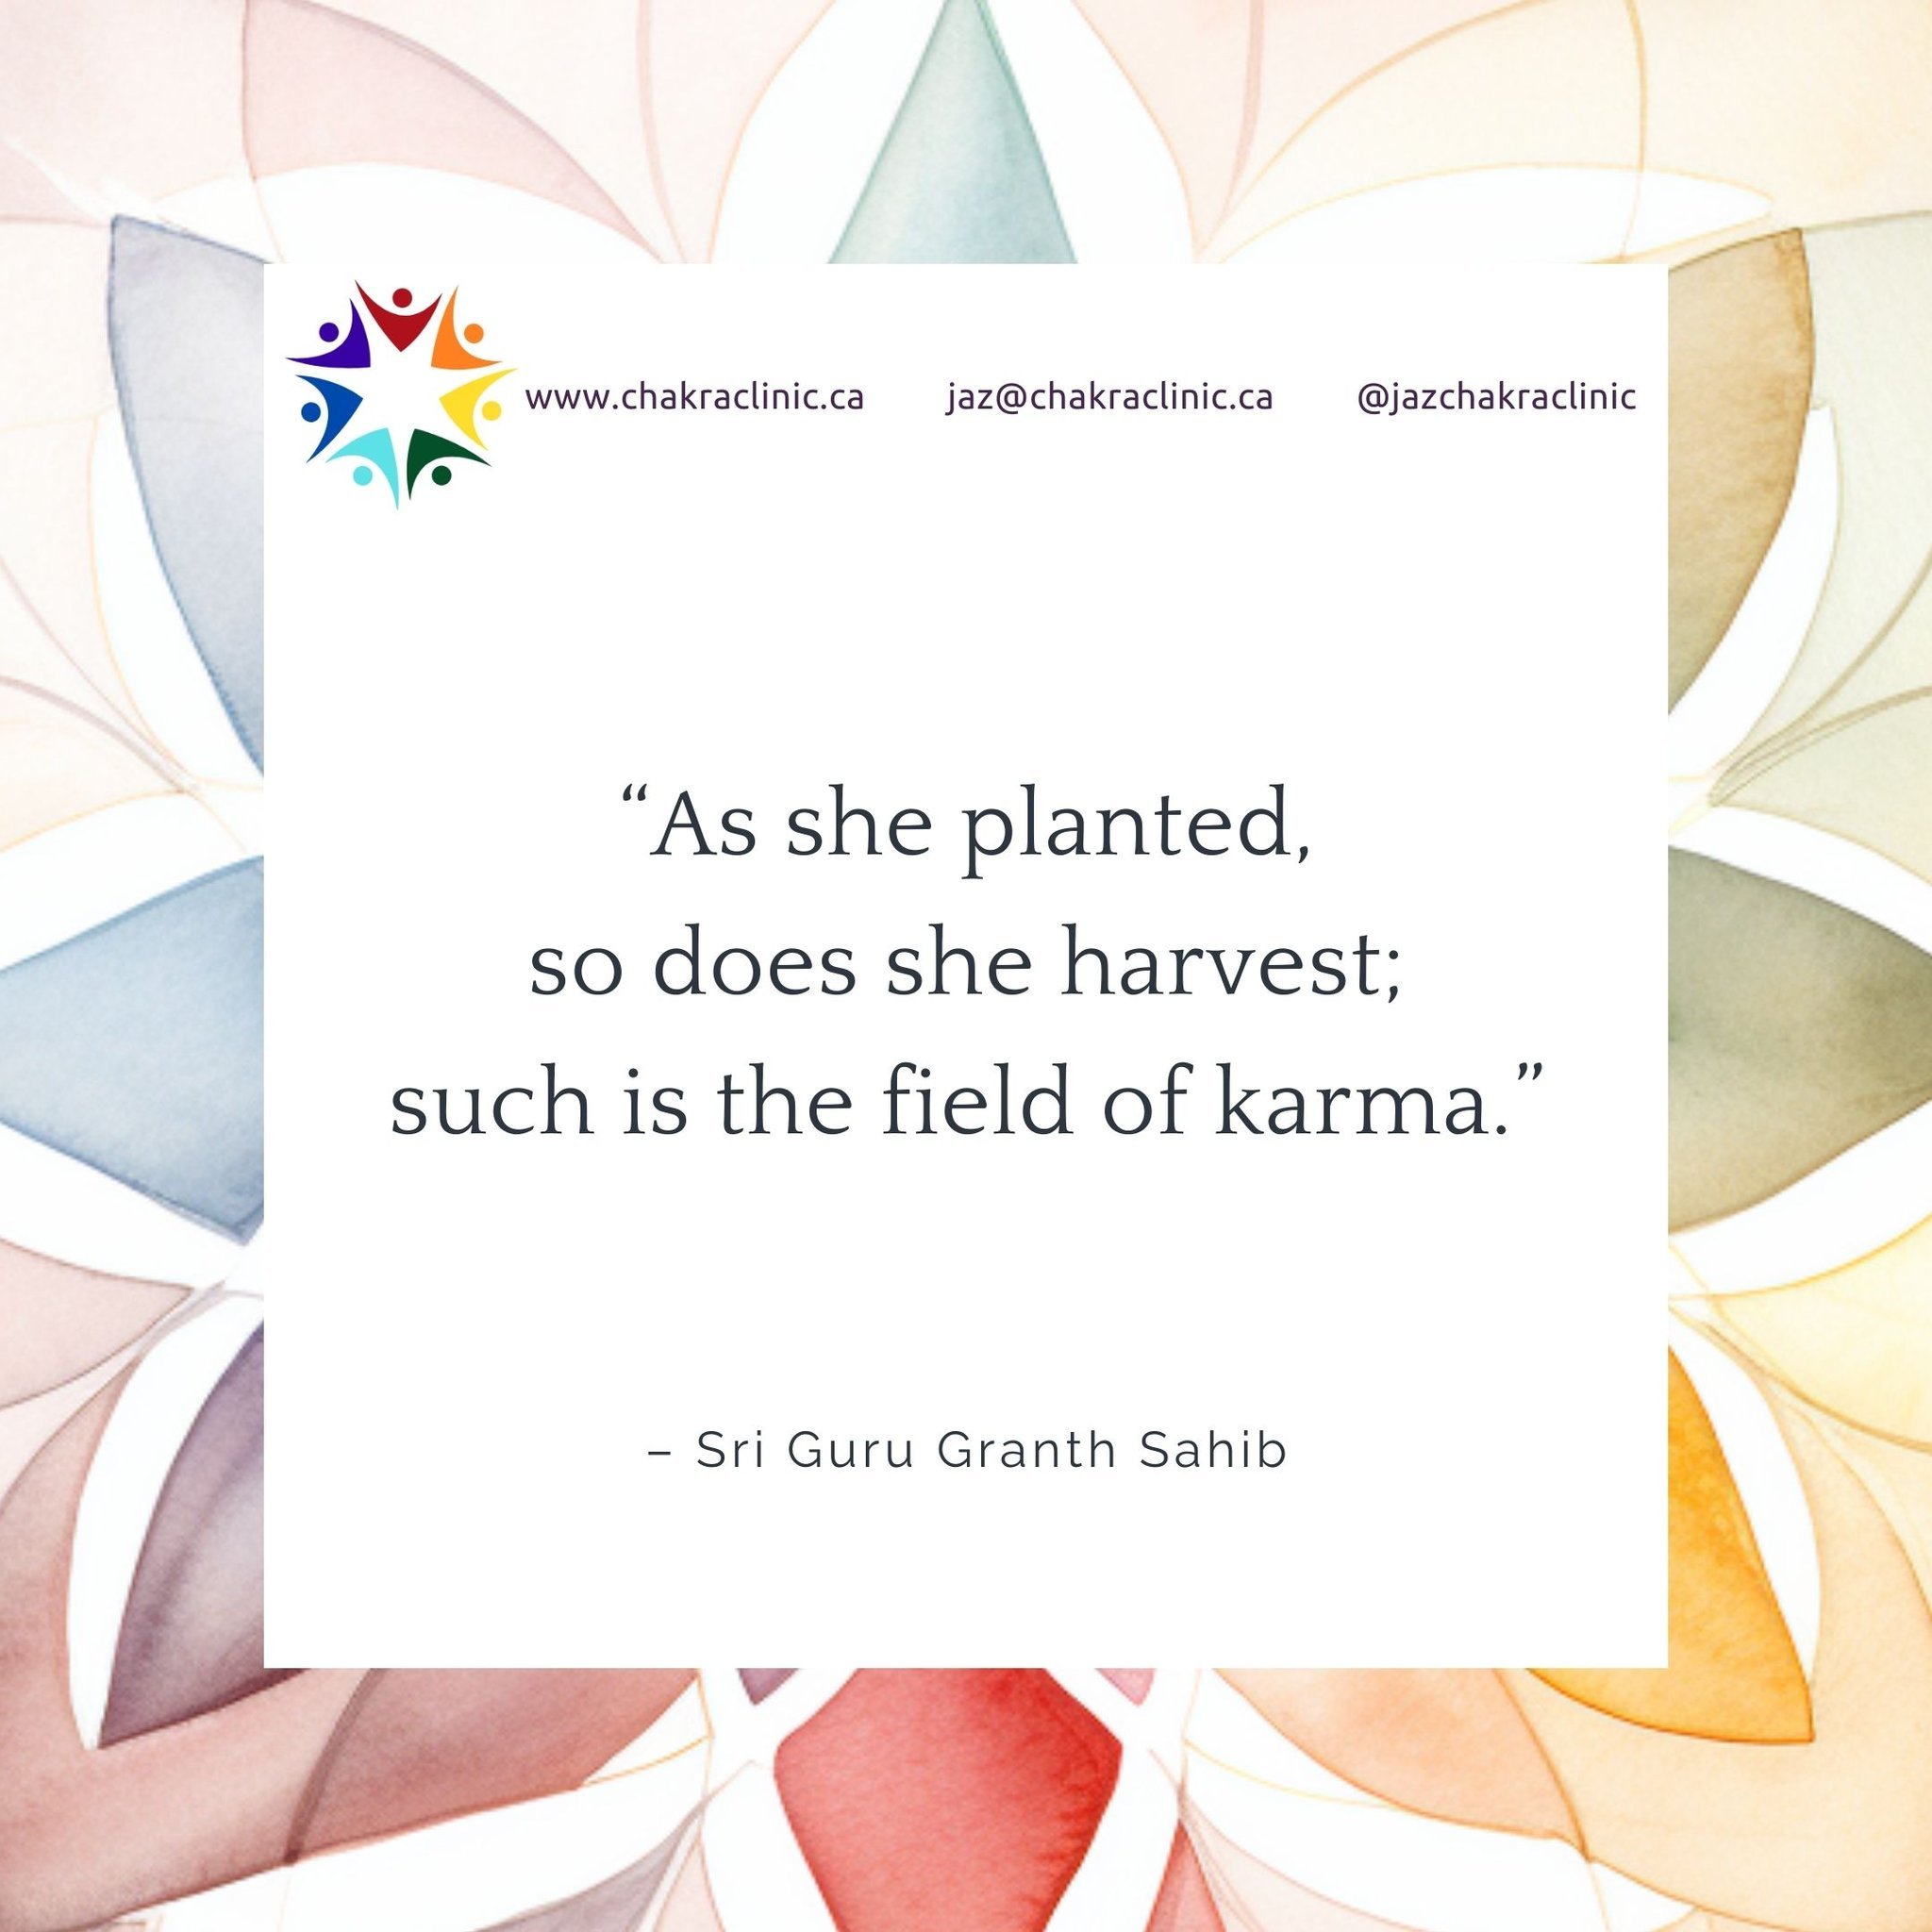 🌱✨ Here&rsquo;s some timeless wisdom from Sri Guru Granth Sahib: &quot;As she planted, so does she harvest; such is the field of karma.&rdquo; 🌱✨

Karma, my friends, isn't the universe's way of punishing us. Far from it. It's about understanding th